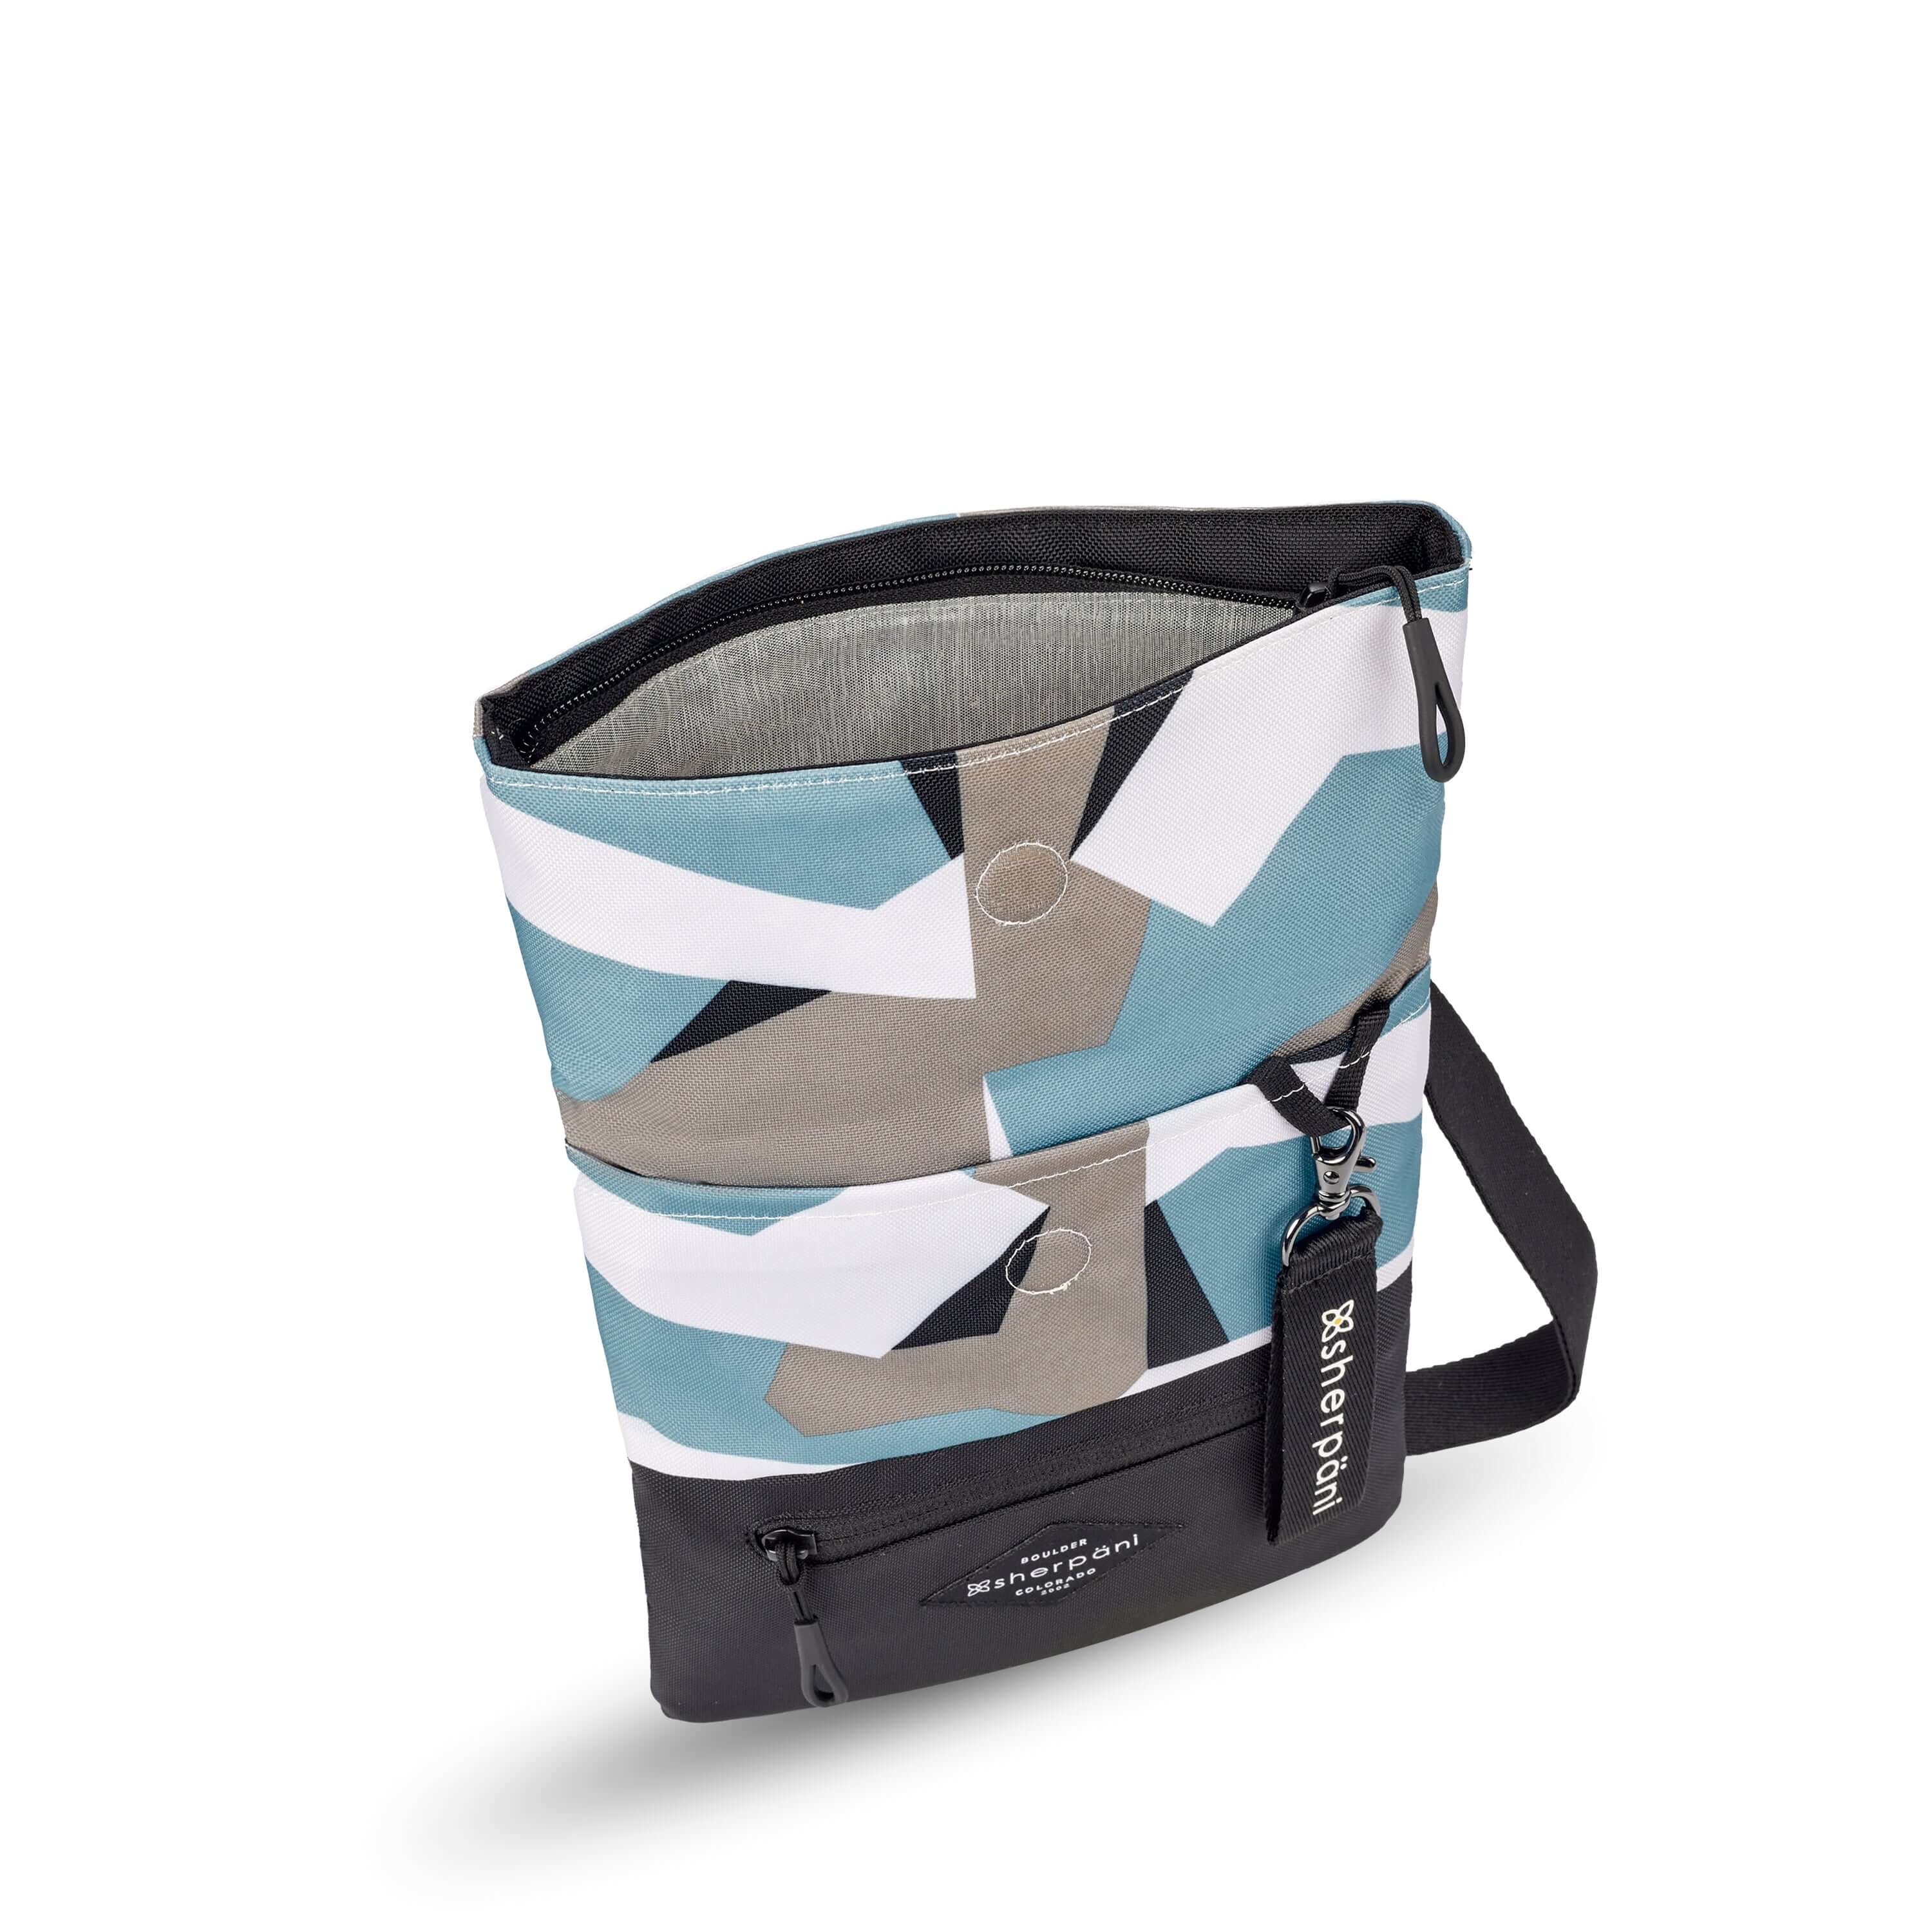 Top view of Sherpani crossbody, the Pica in Summer Camo. The bag is unfolded to stand tall and the main zipper compartment is open to reveal a light gray interior.